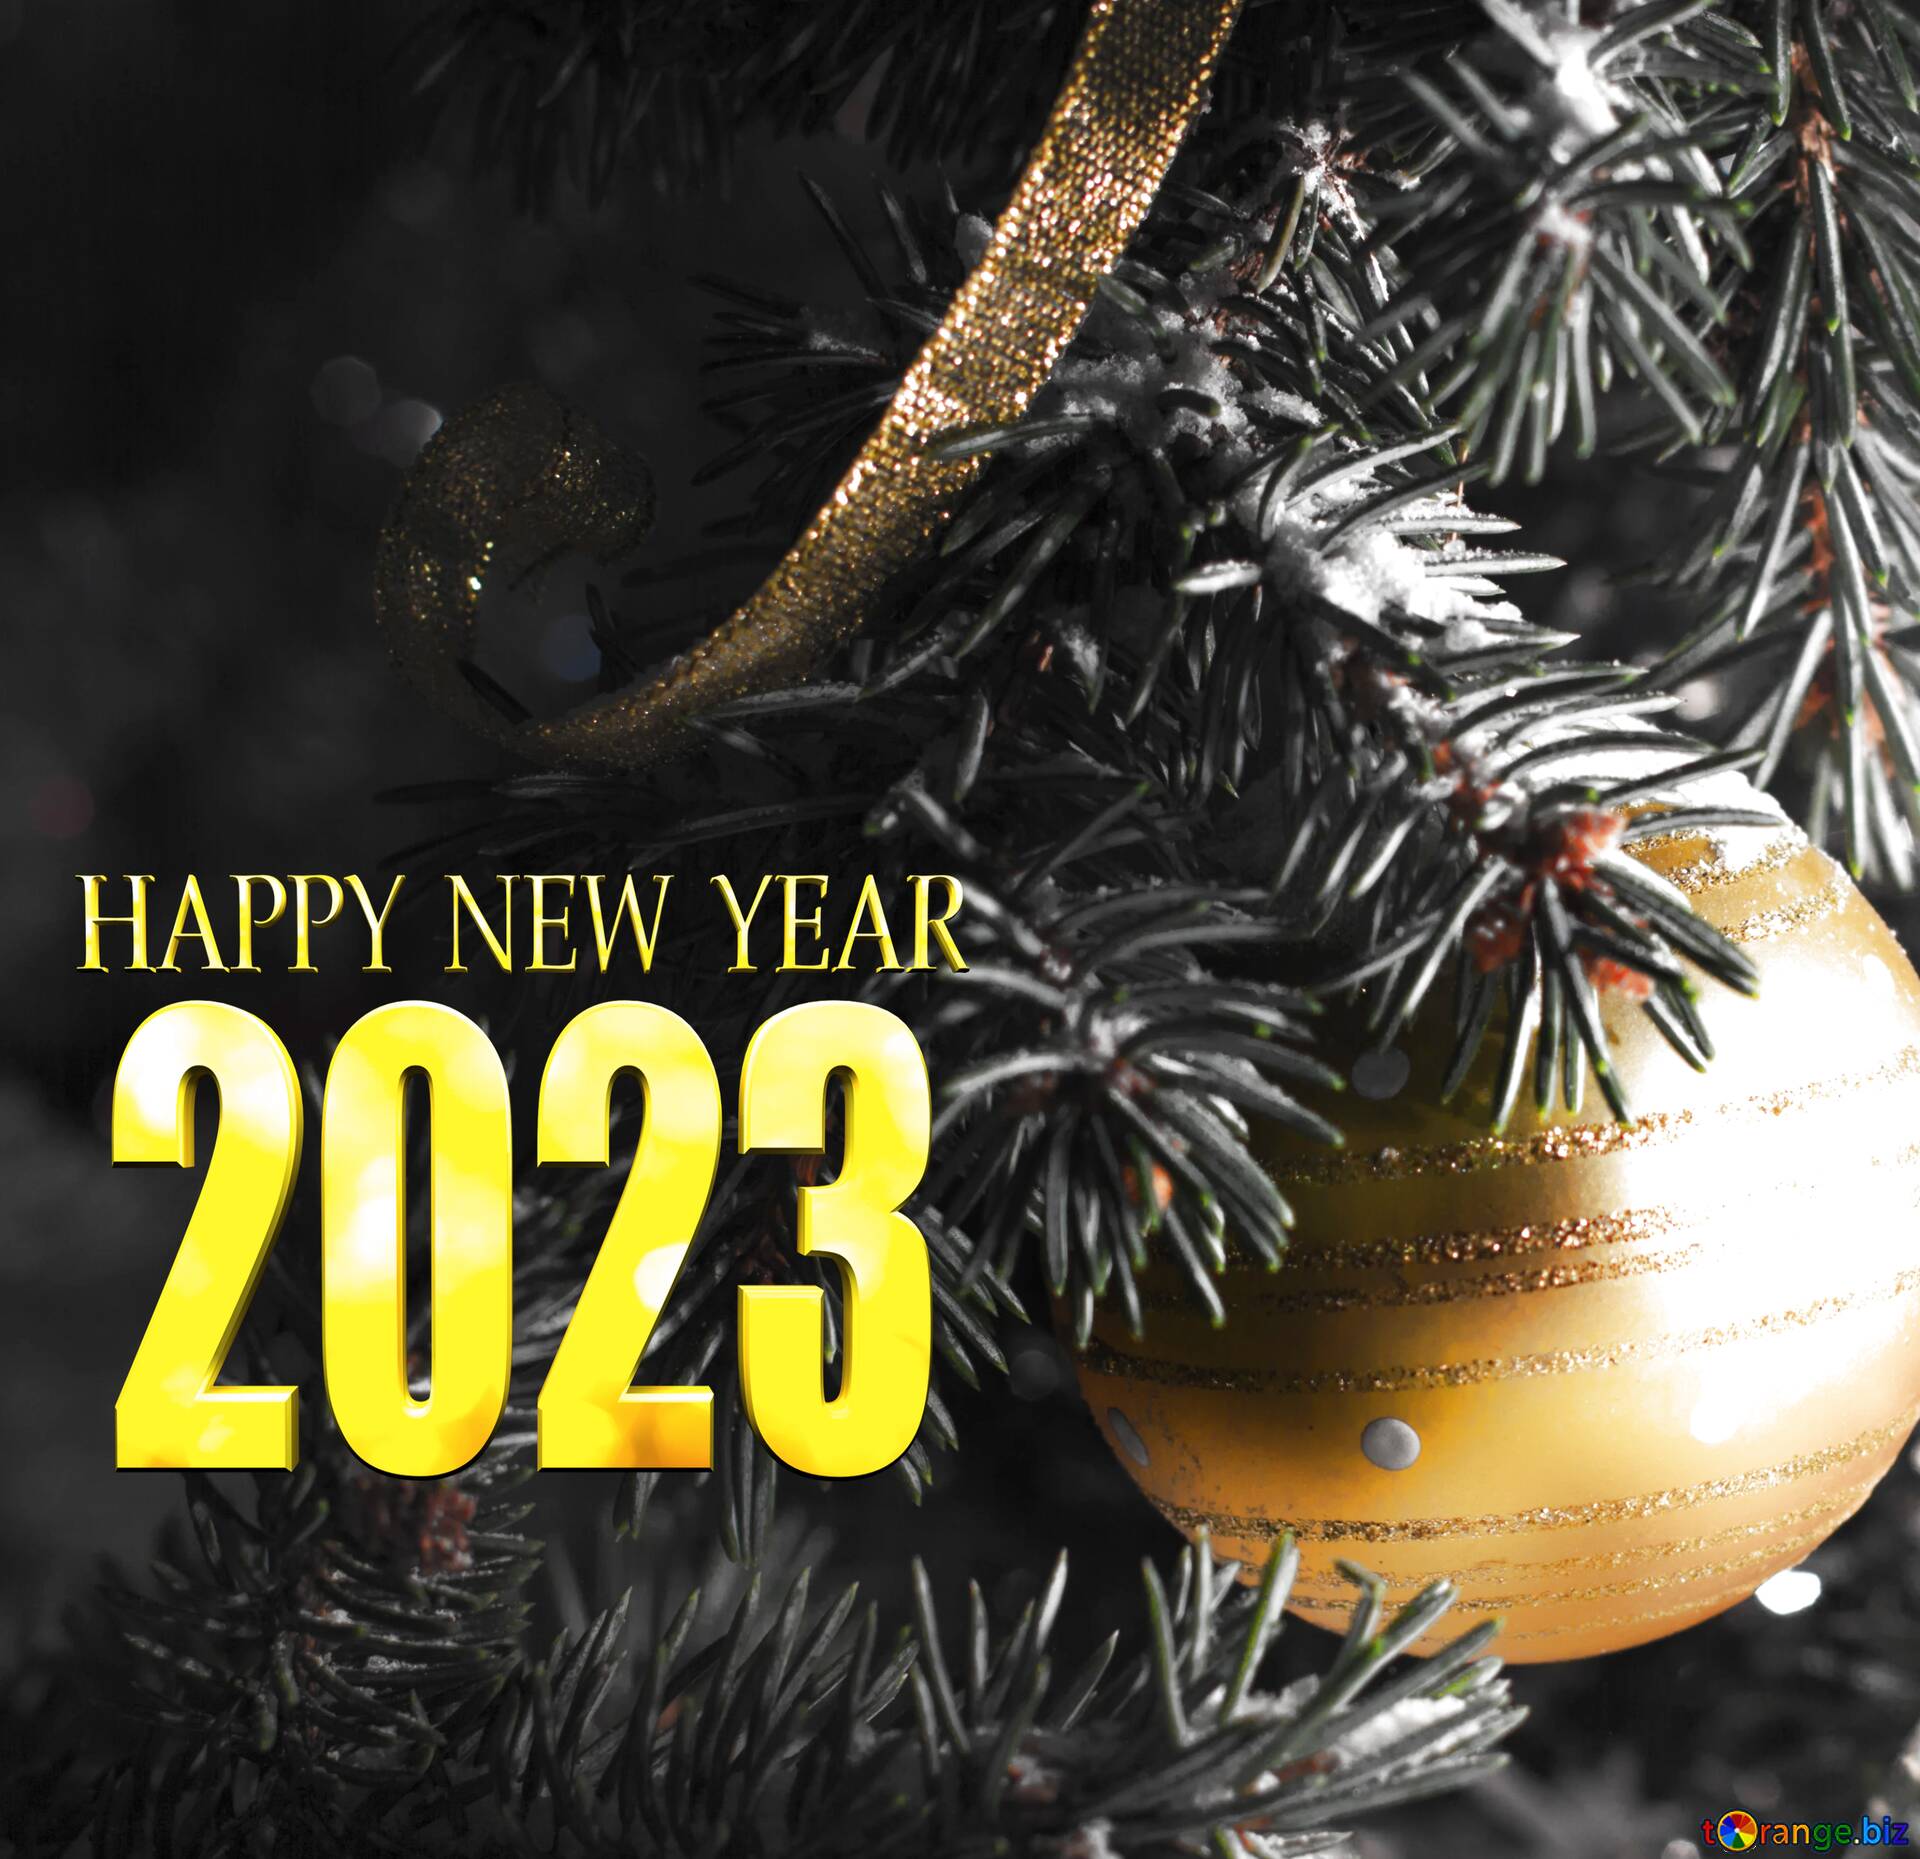 Happy New Year 2023 Wallpapers - Wallpaper Cave